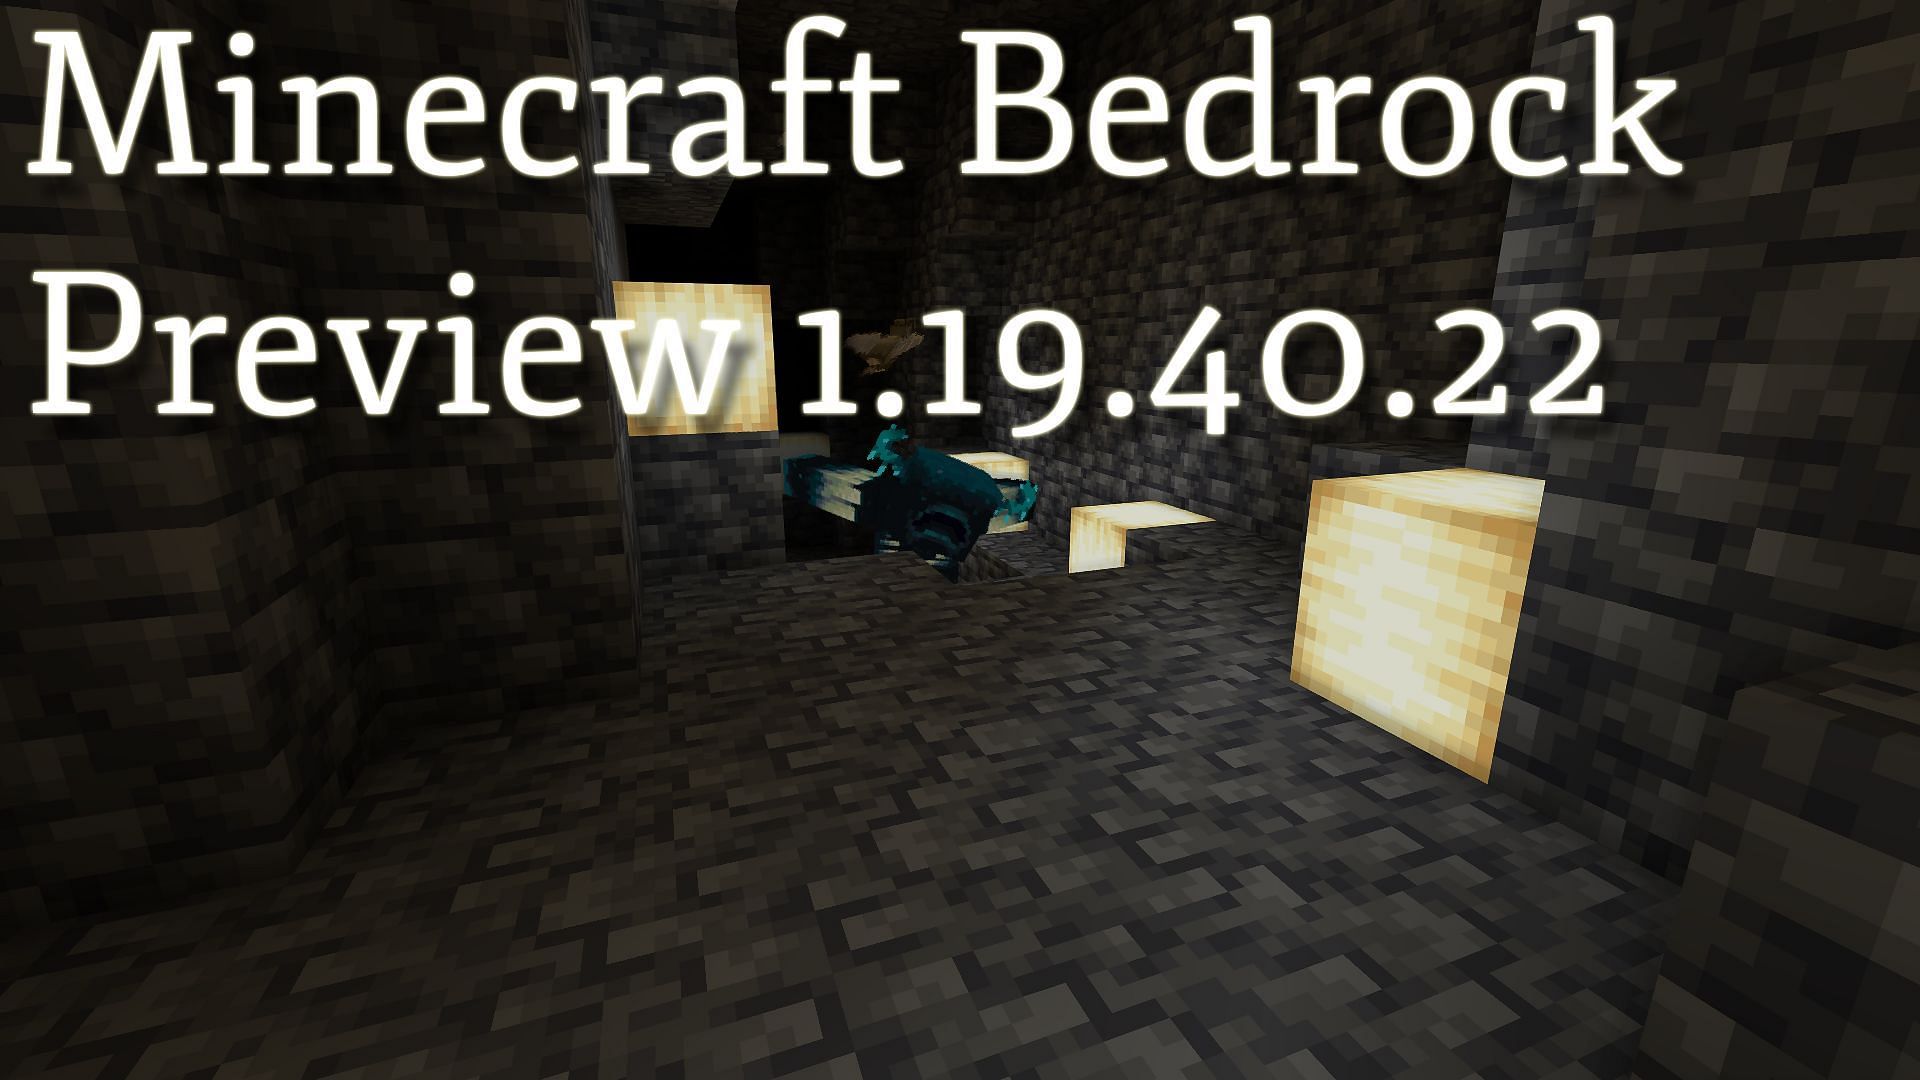 Preview 1.19.40.22 has been released (Image via Minecraft)